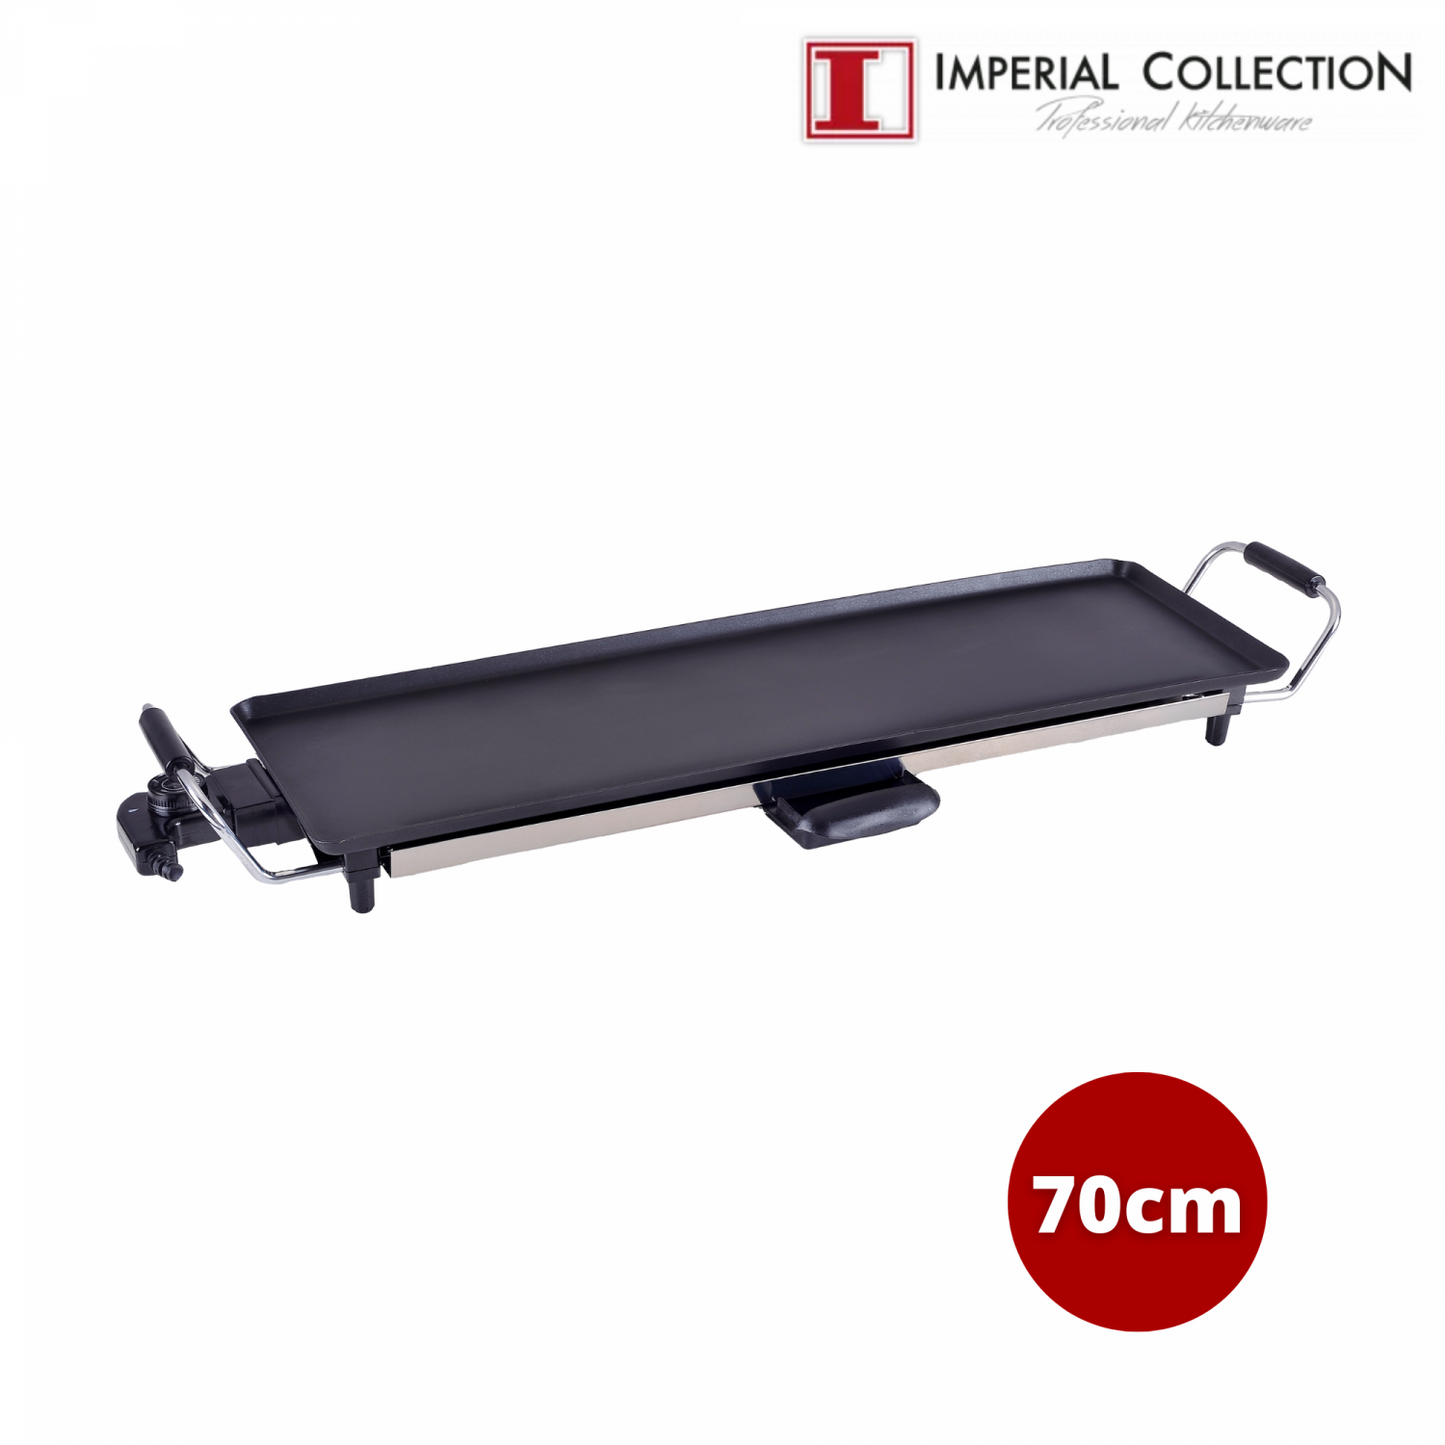 Imperial Collection 70cm Electric Multi-Grill